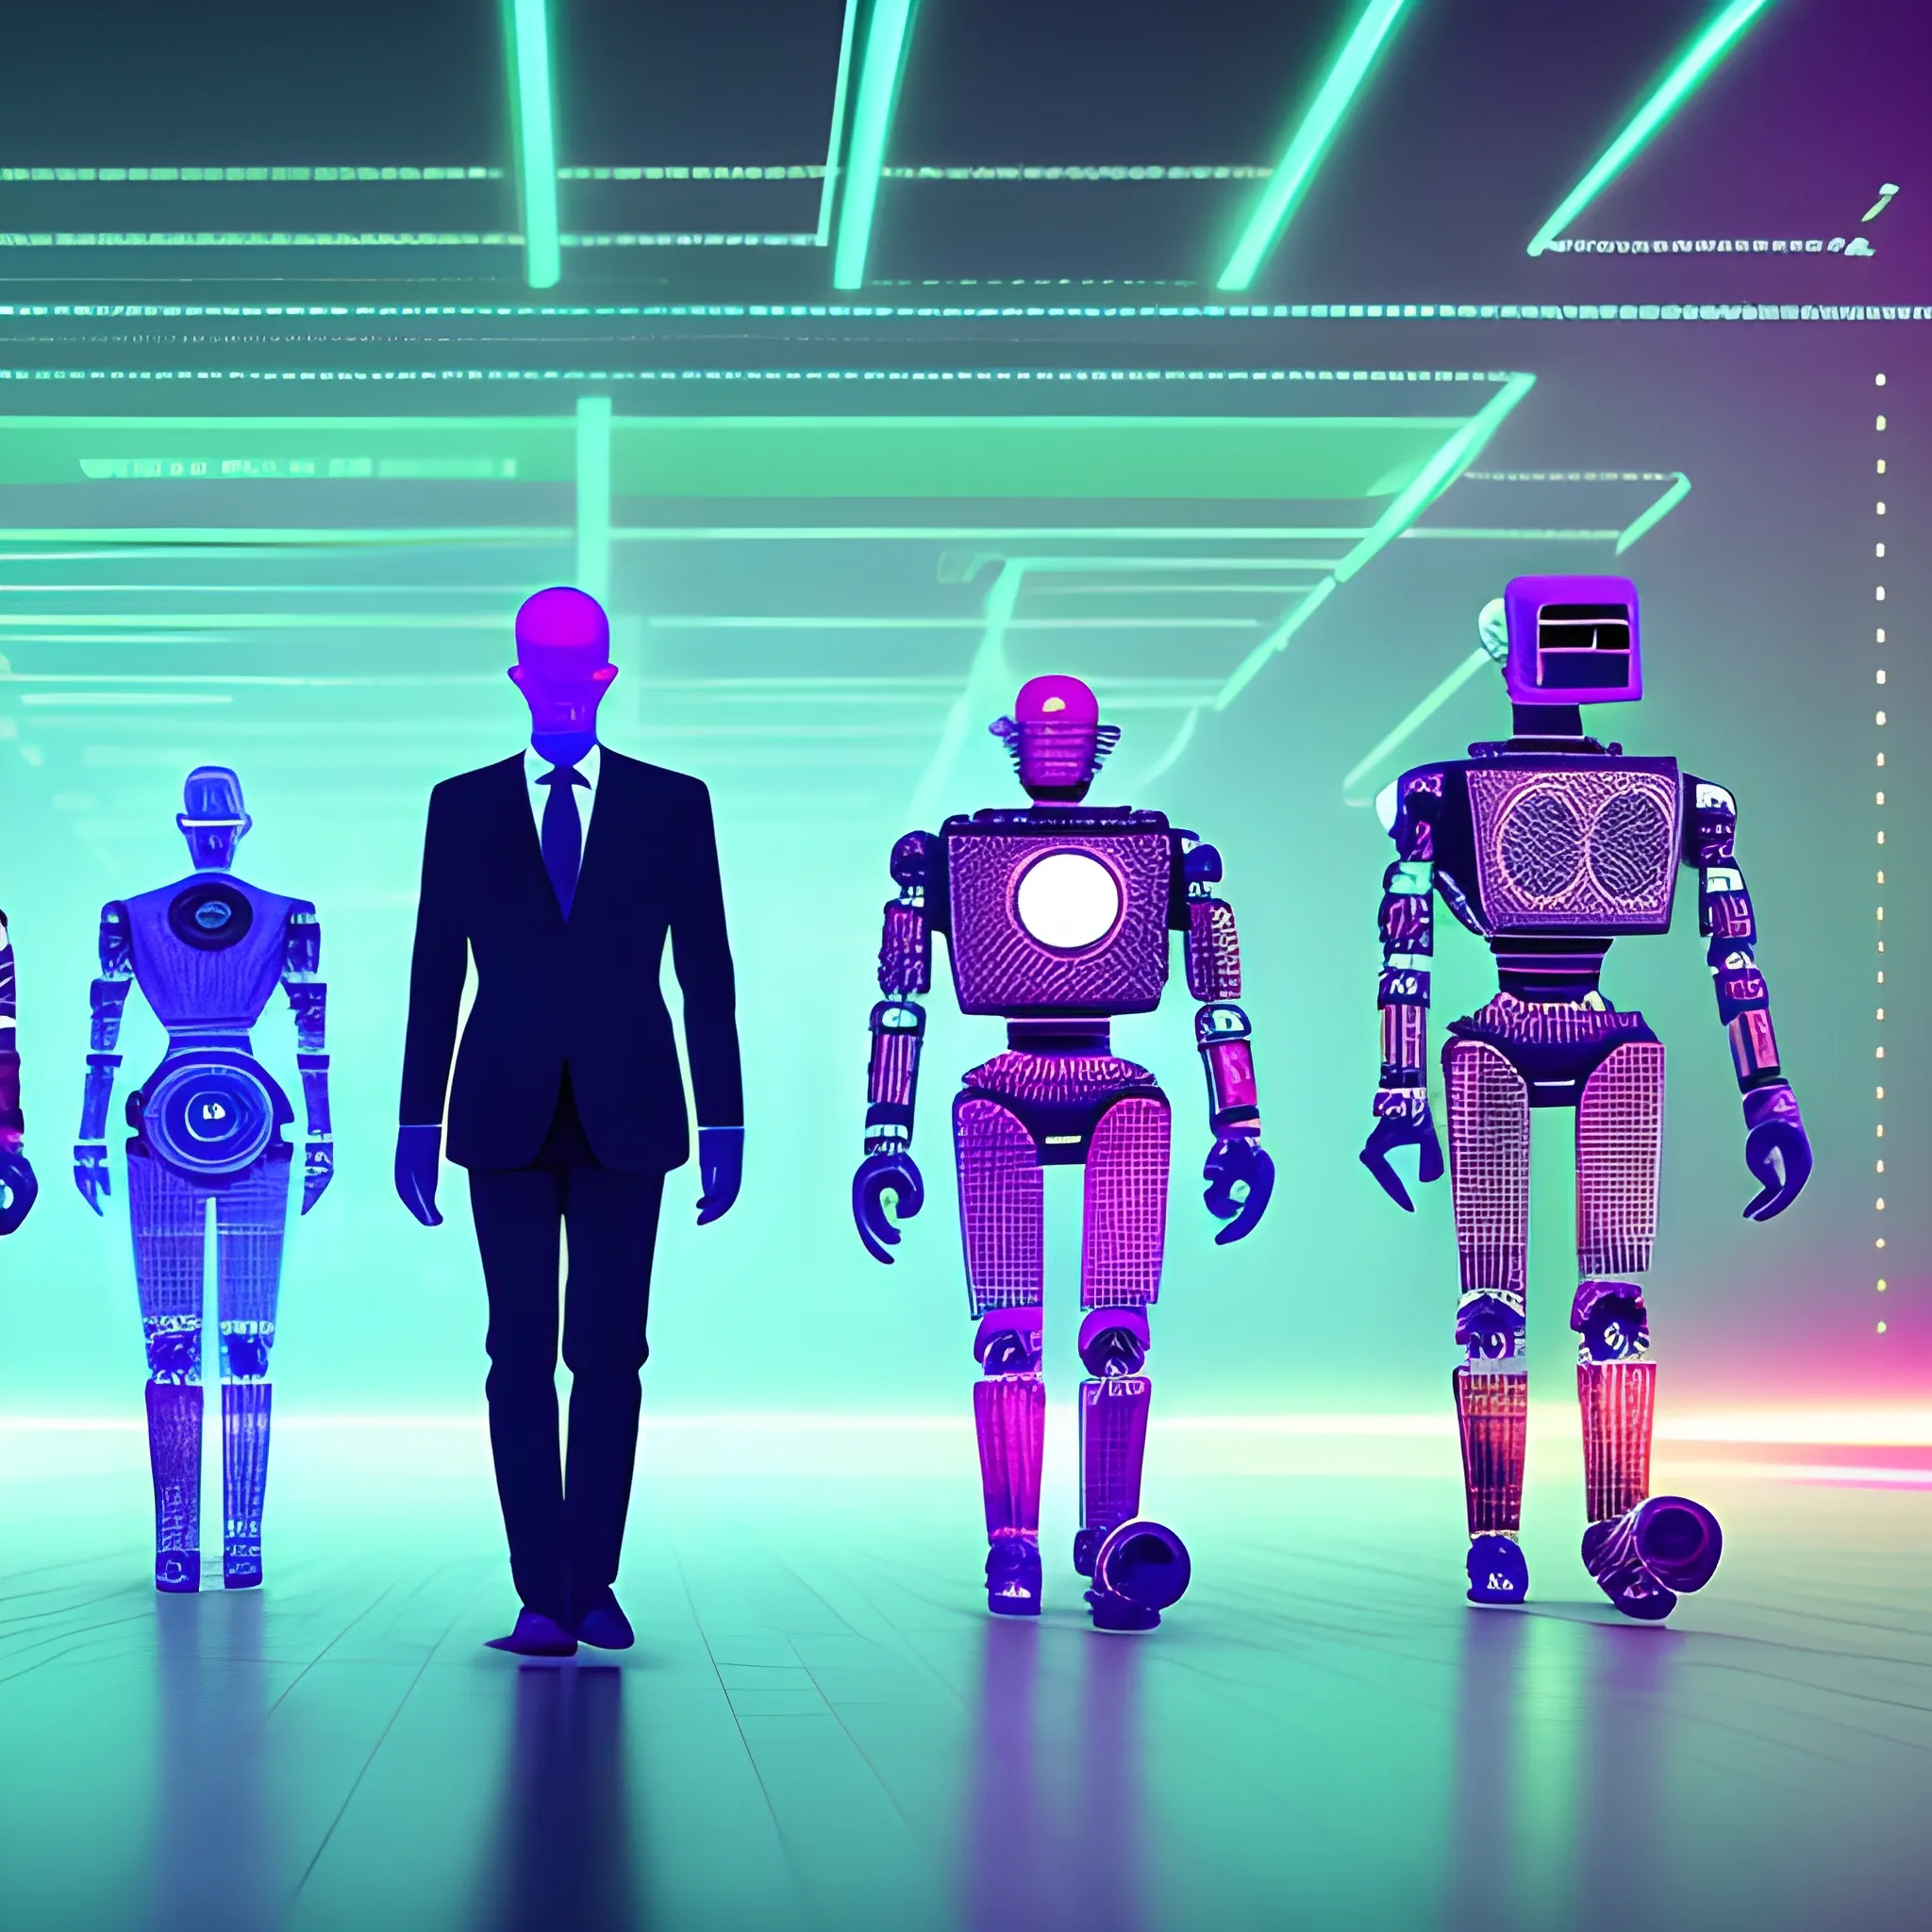 Generate a corporative, future, colorful, modern image, trippy, related to digital products, do not use machines, do not use text and use really environment with this concept: "robot walking alongside human executives"